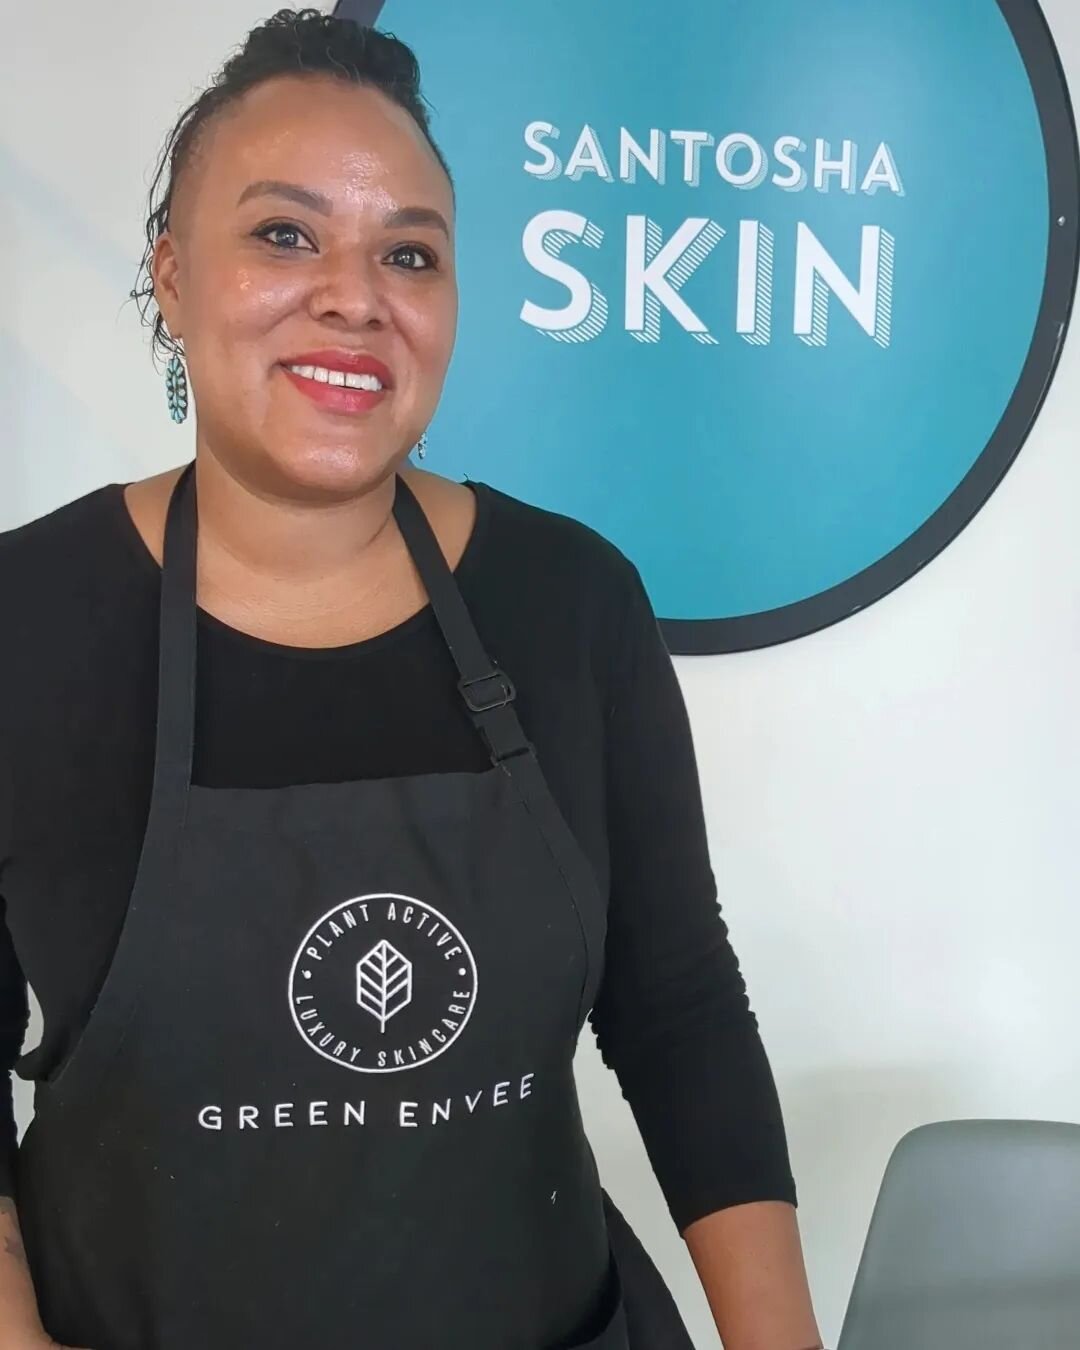 WELCOME WELCOME WELCOME Adena Poncho @skinbyadena ✨ Santosha is blessed beyond measure to have the skill, the talent, the energy that Adena brings. Help me give this amazing woman and esthetician a warm welcome. Her books are live! Schedule your next